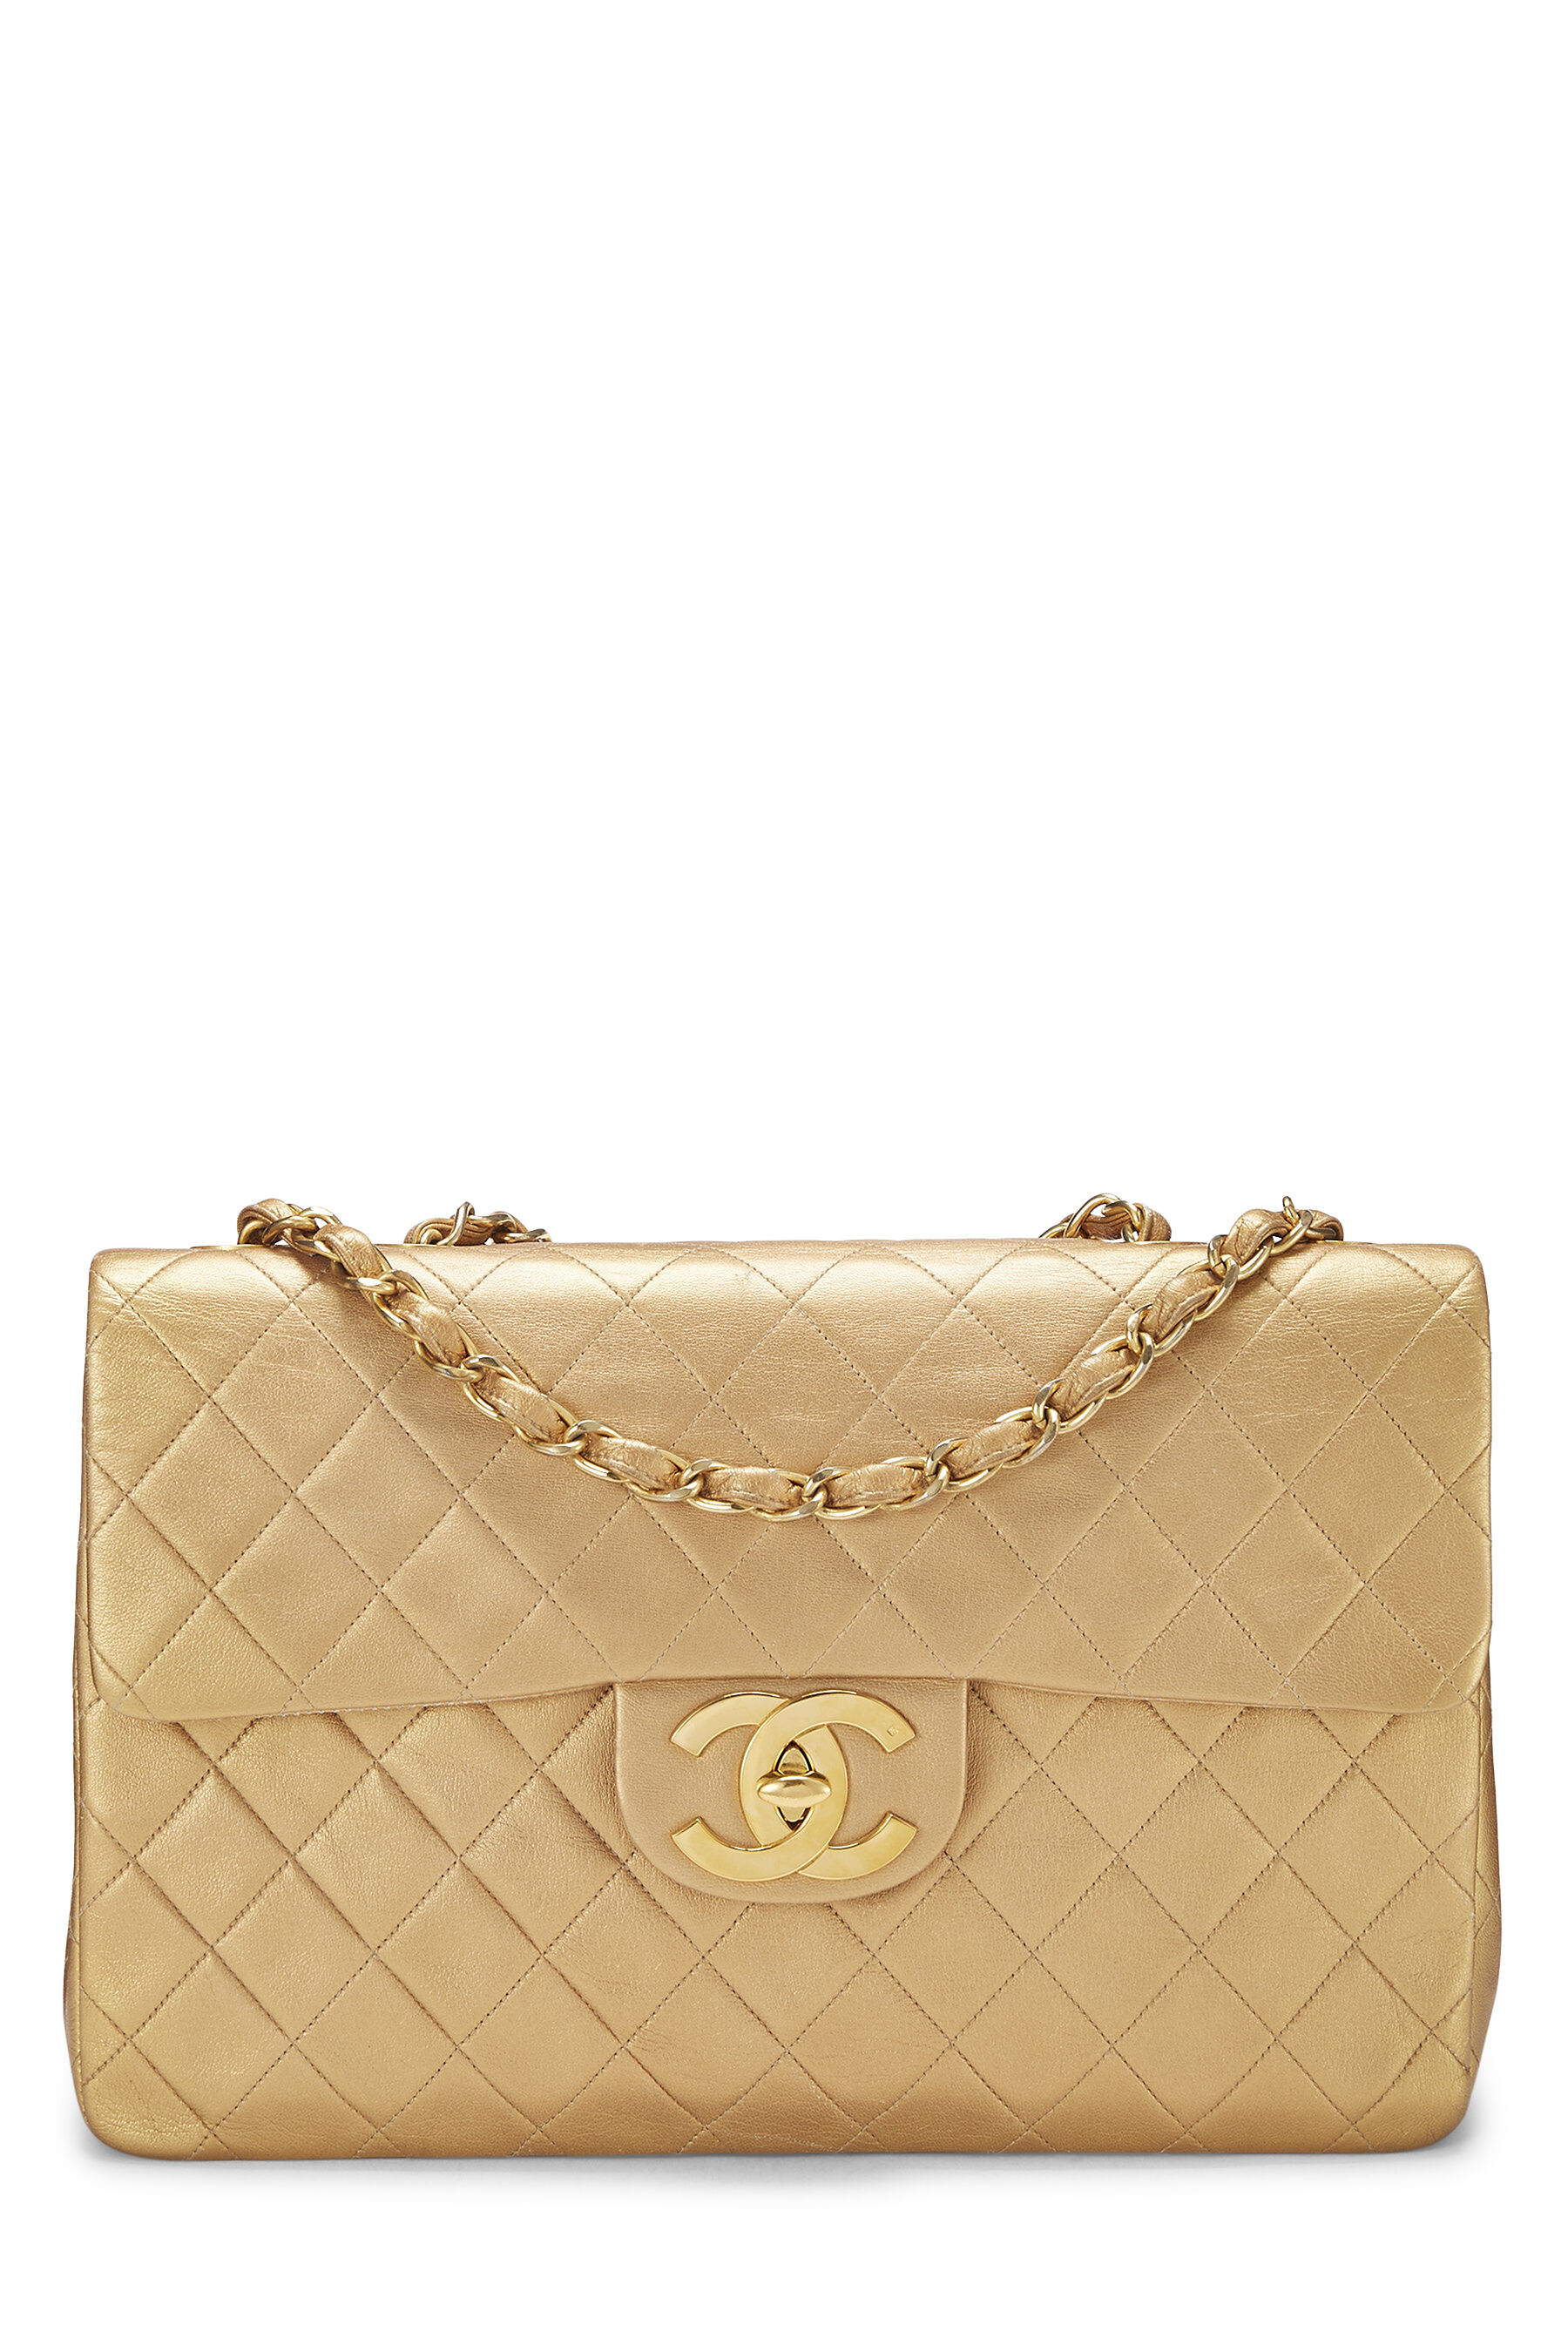 Chanel Gold Quilted Lambskin Square Flap Bag Q6B0271ID9019